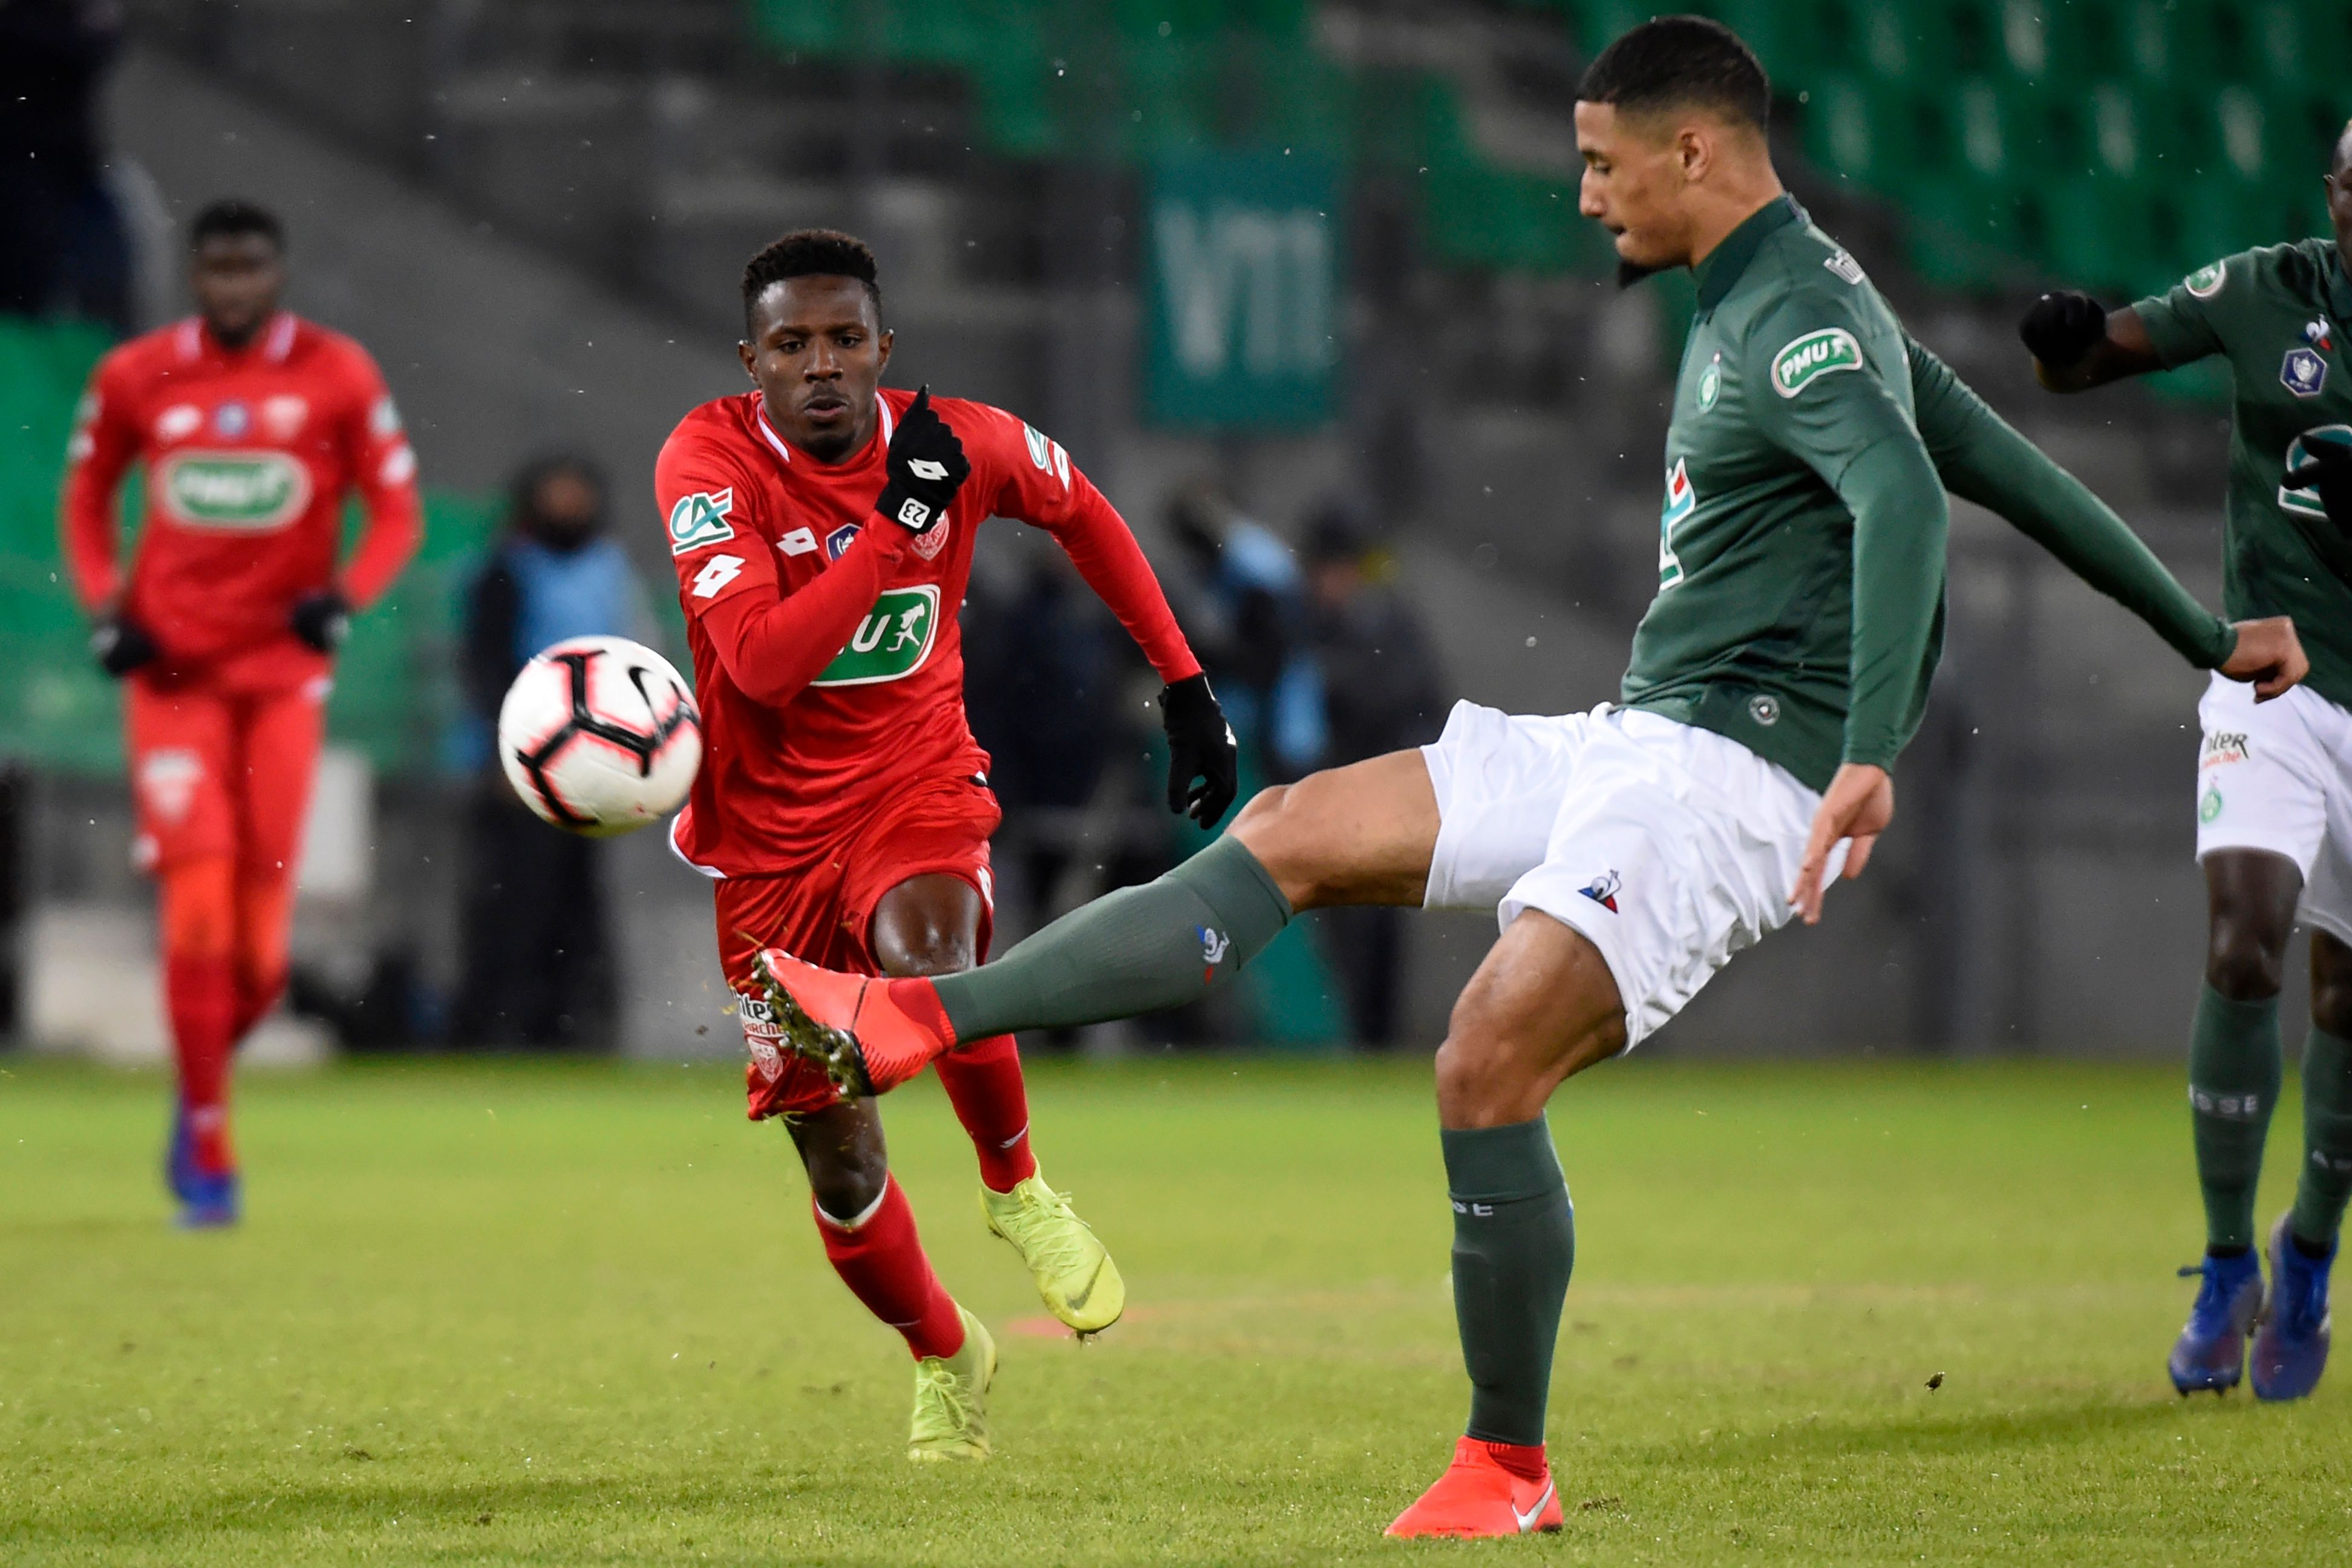 Dijon's Guinean midfielder Jules Keita (L) vies with Saint-Etienne's French forward William Saliba (R) during the French Cup round of 32 football match between Saint-Etienne (L1) and Dijon (L1), on January 23, 2019, at the Geoffroy Guichard Stadium in Saint-Etienne, central France. (Photo by JEAN-PHILIPPE KSIAZEK / AFP)        (Photo credit should read JEAN-PHILIPPE KSIAZEK/AFP/Getty Images)